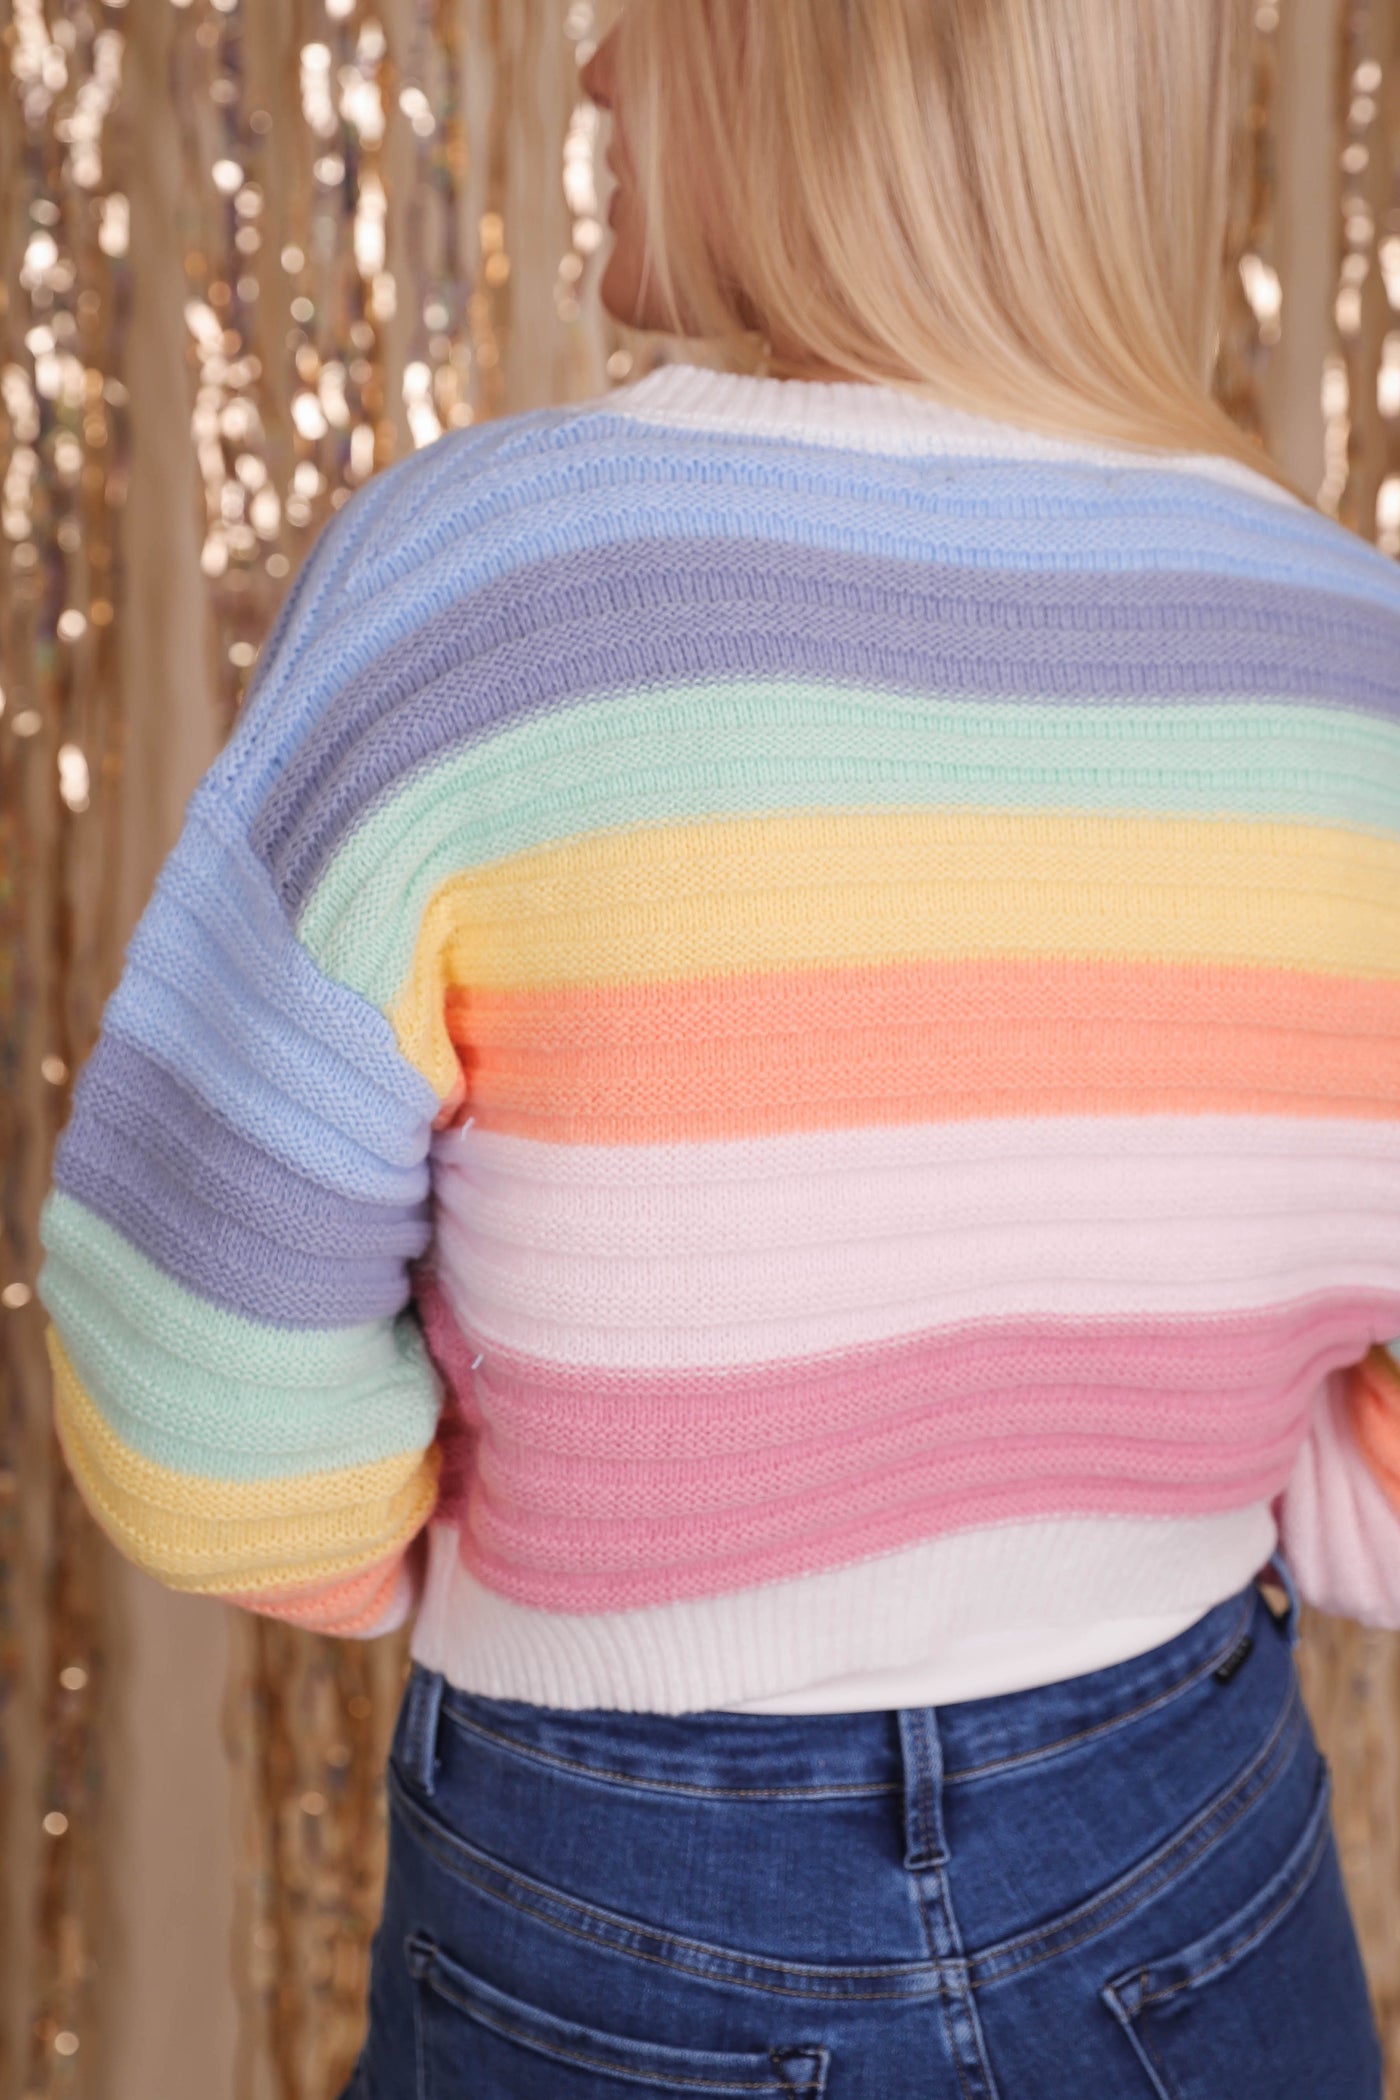 Women's Cropped Rainbow Cardigan- Women's Fun Rainbow Sweater- Colorful Fall Clothes